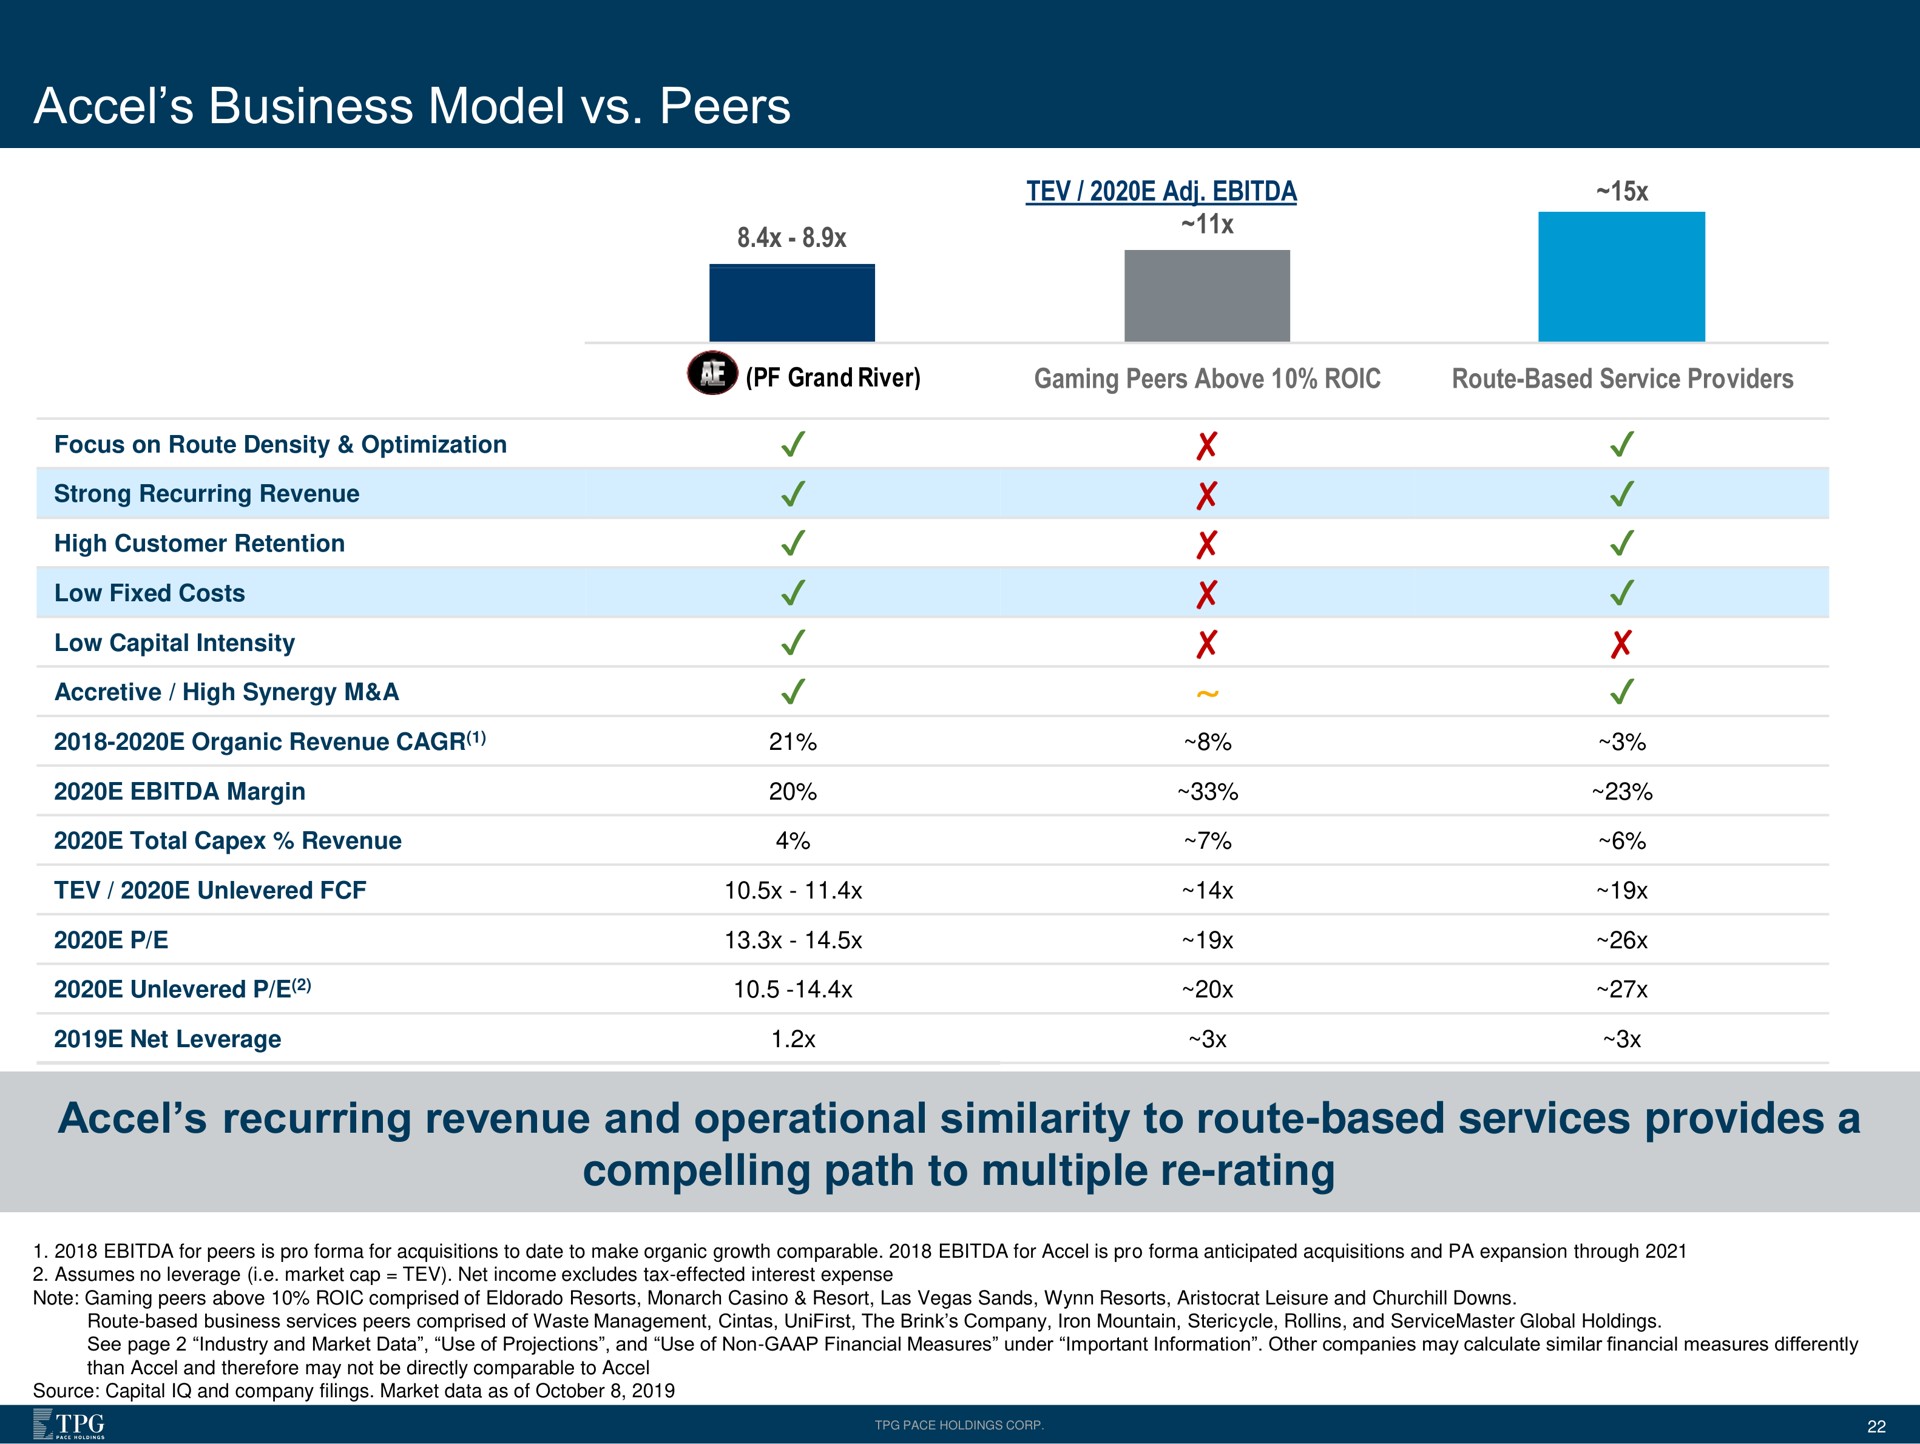 business model peers recurring revenue and operational similarity to route based services provides a compelling path to multiple rating | Accel Entertaiment